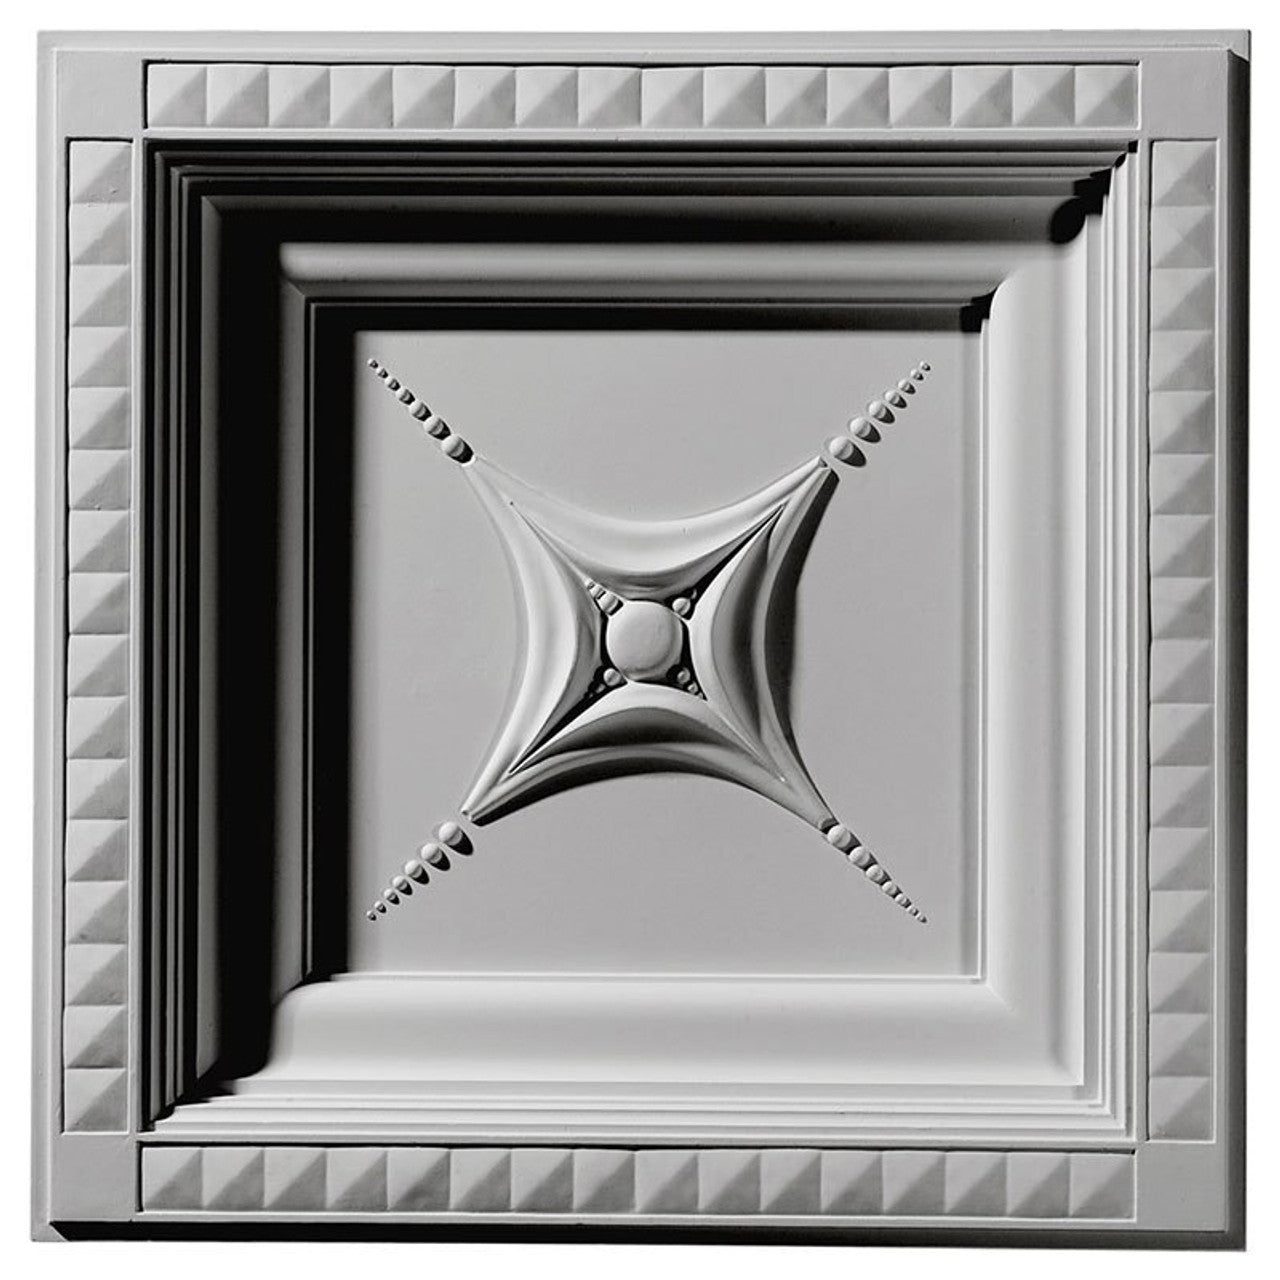 Star - Urethane - Coffered Drop Ceiling Tile - 24"x24"